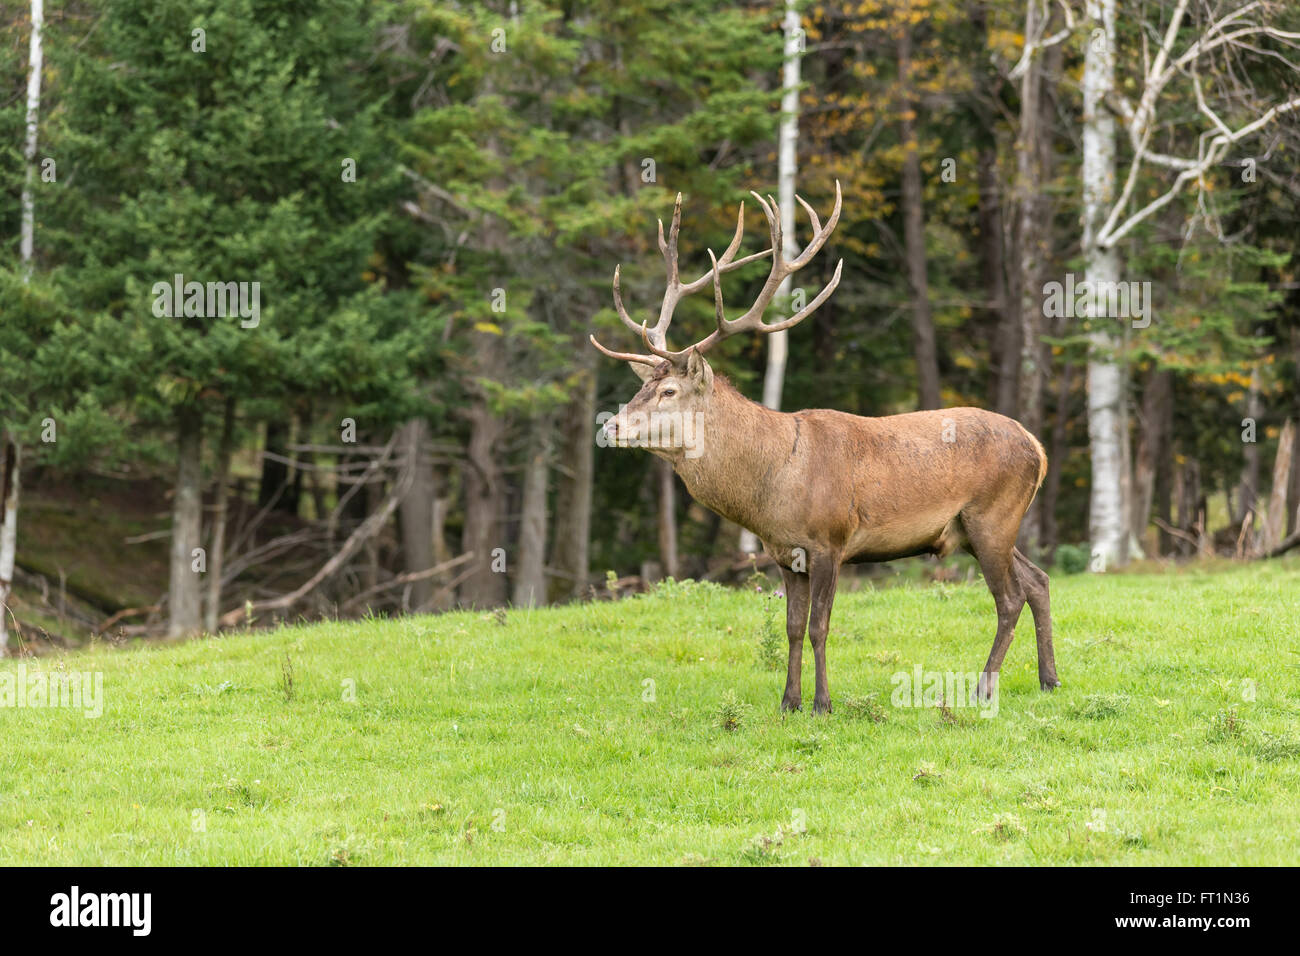 Large male deer in the woods Stock Photo